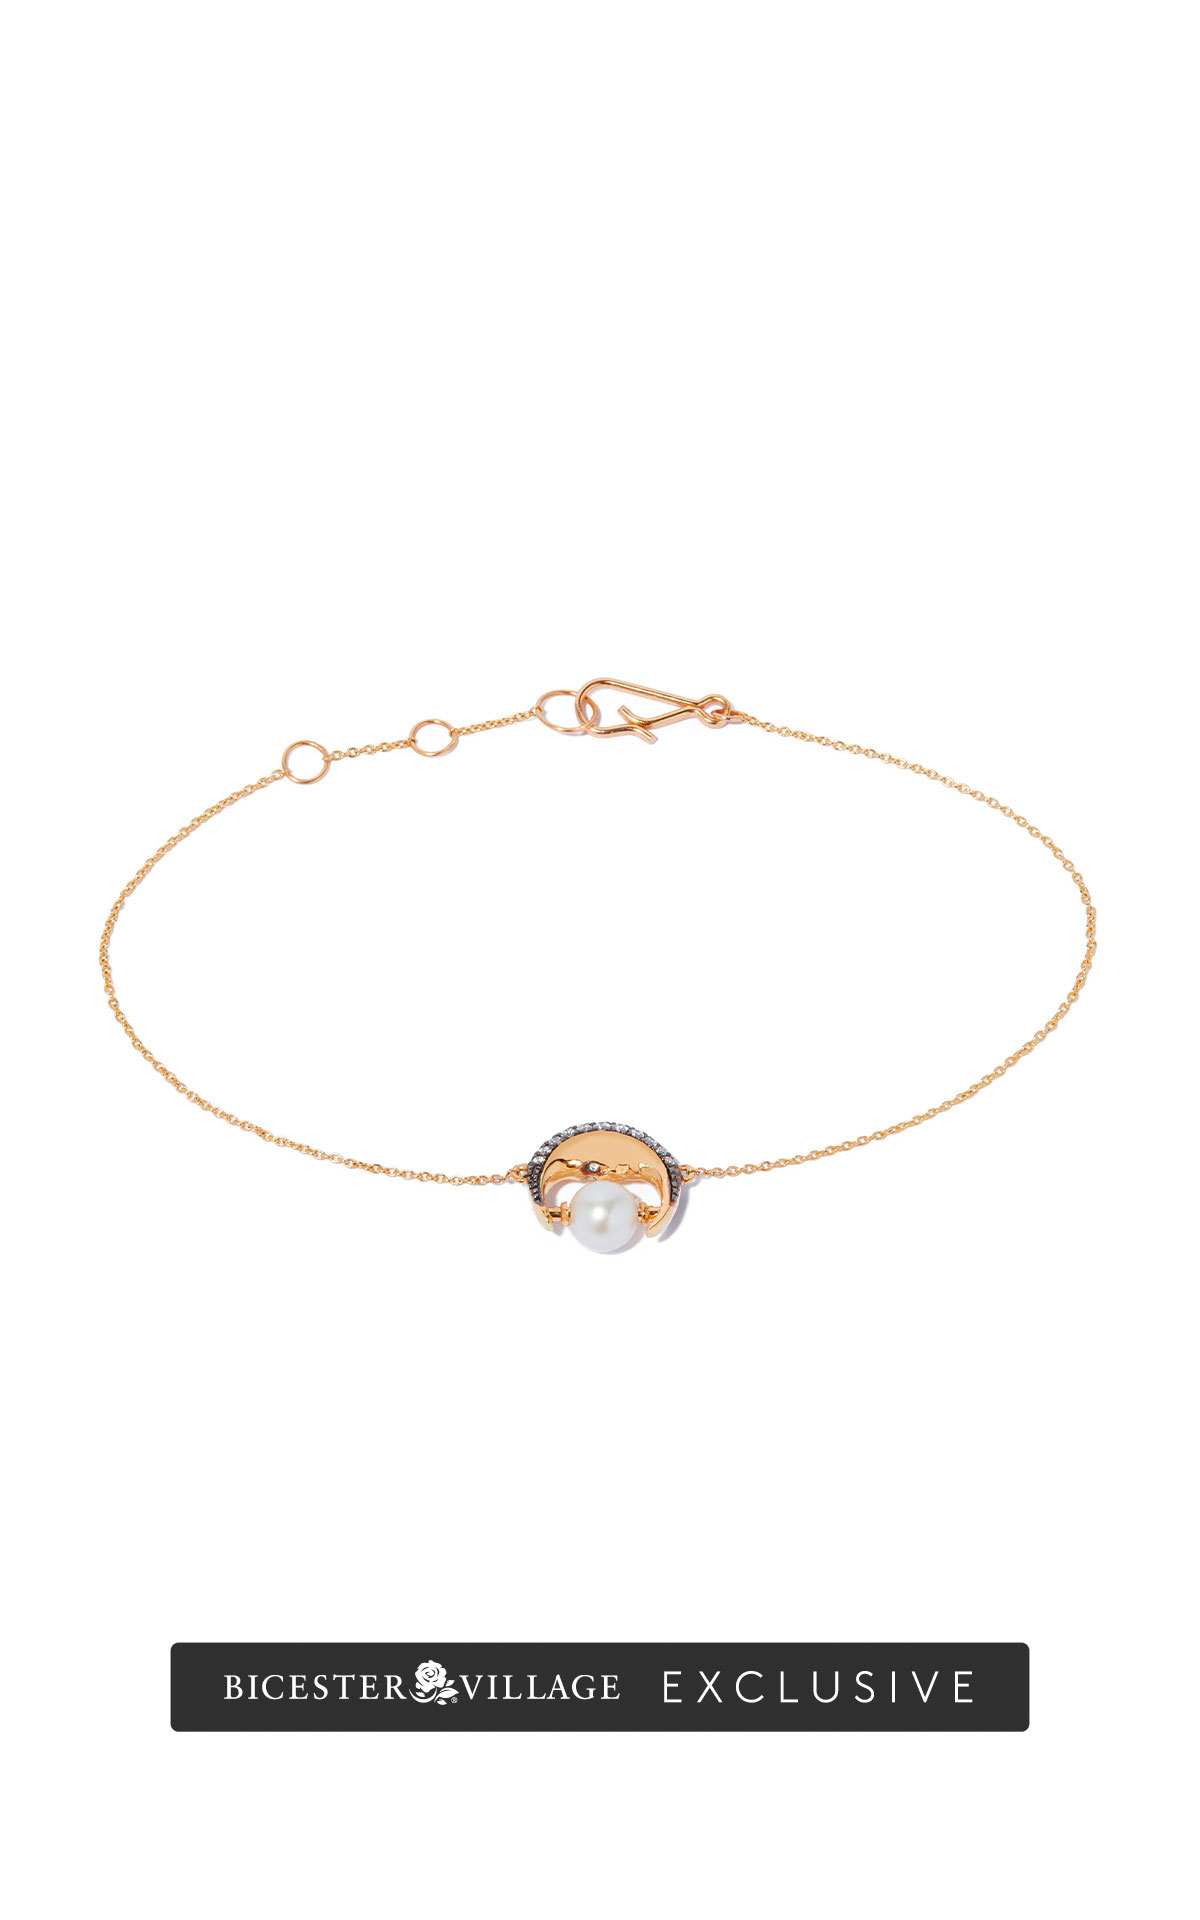 Annoushka 18ct gold bracelet with pearl and diamonds from Bicester Village